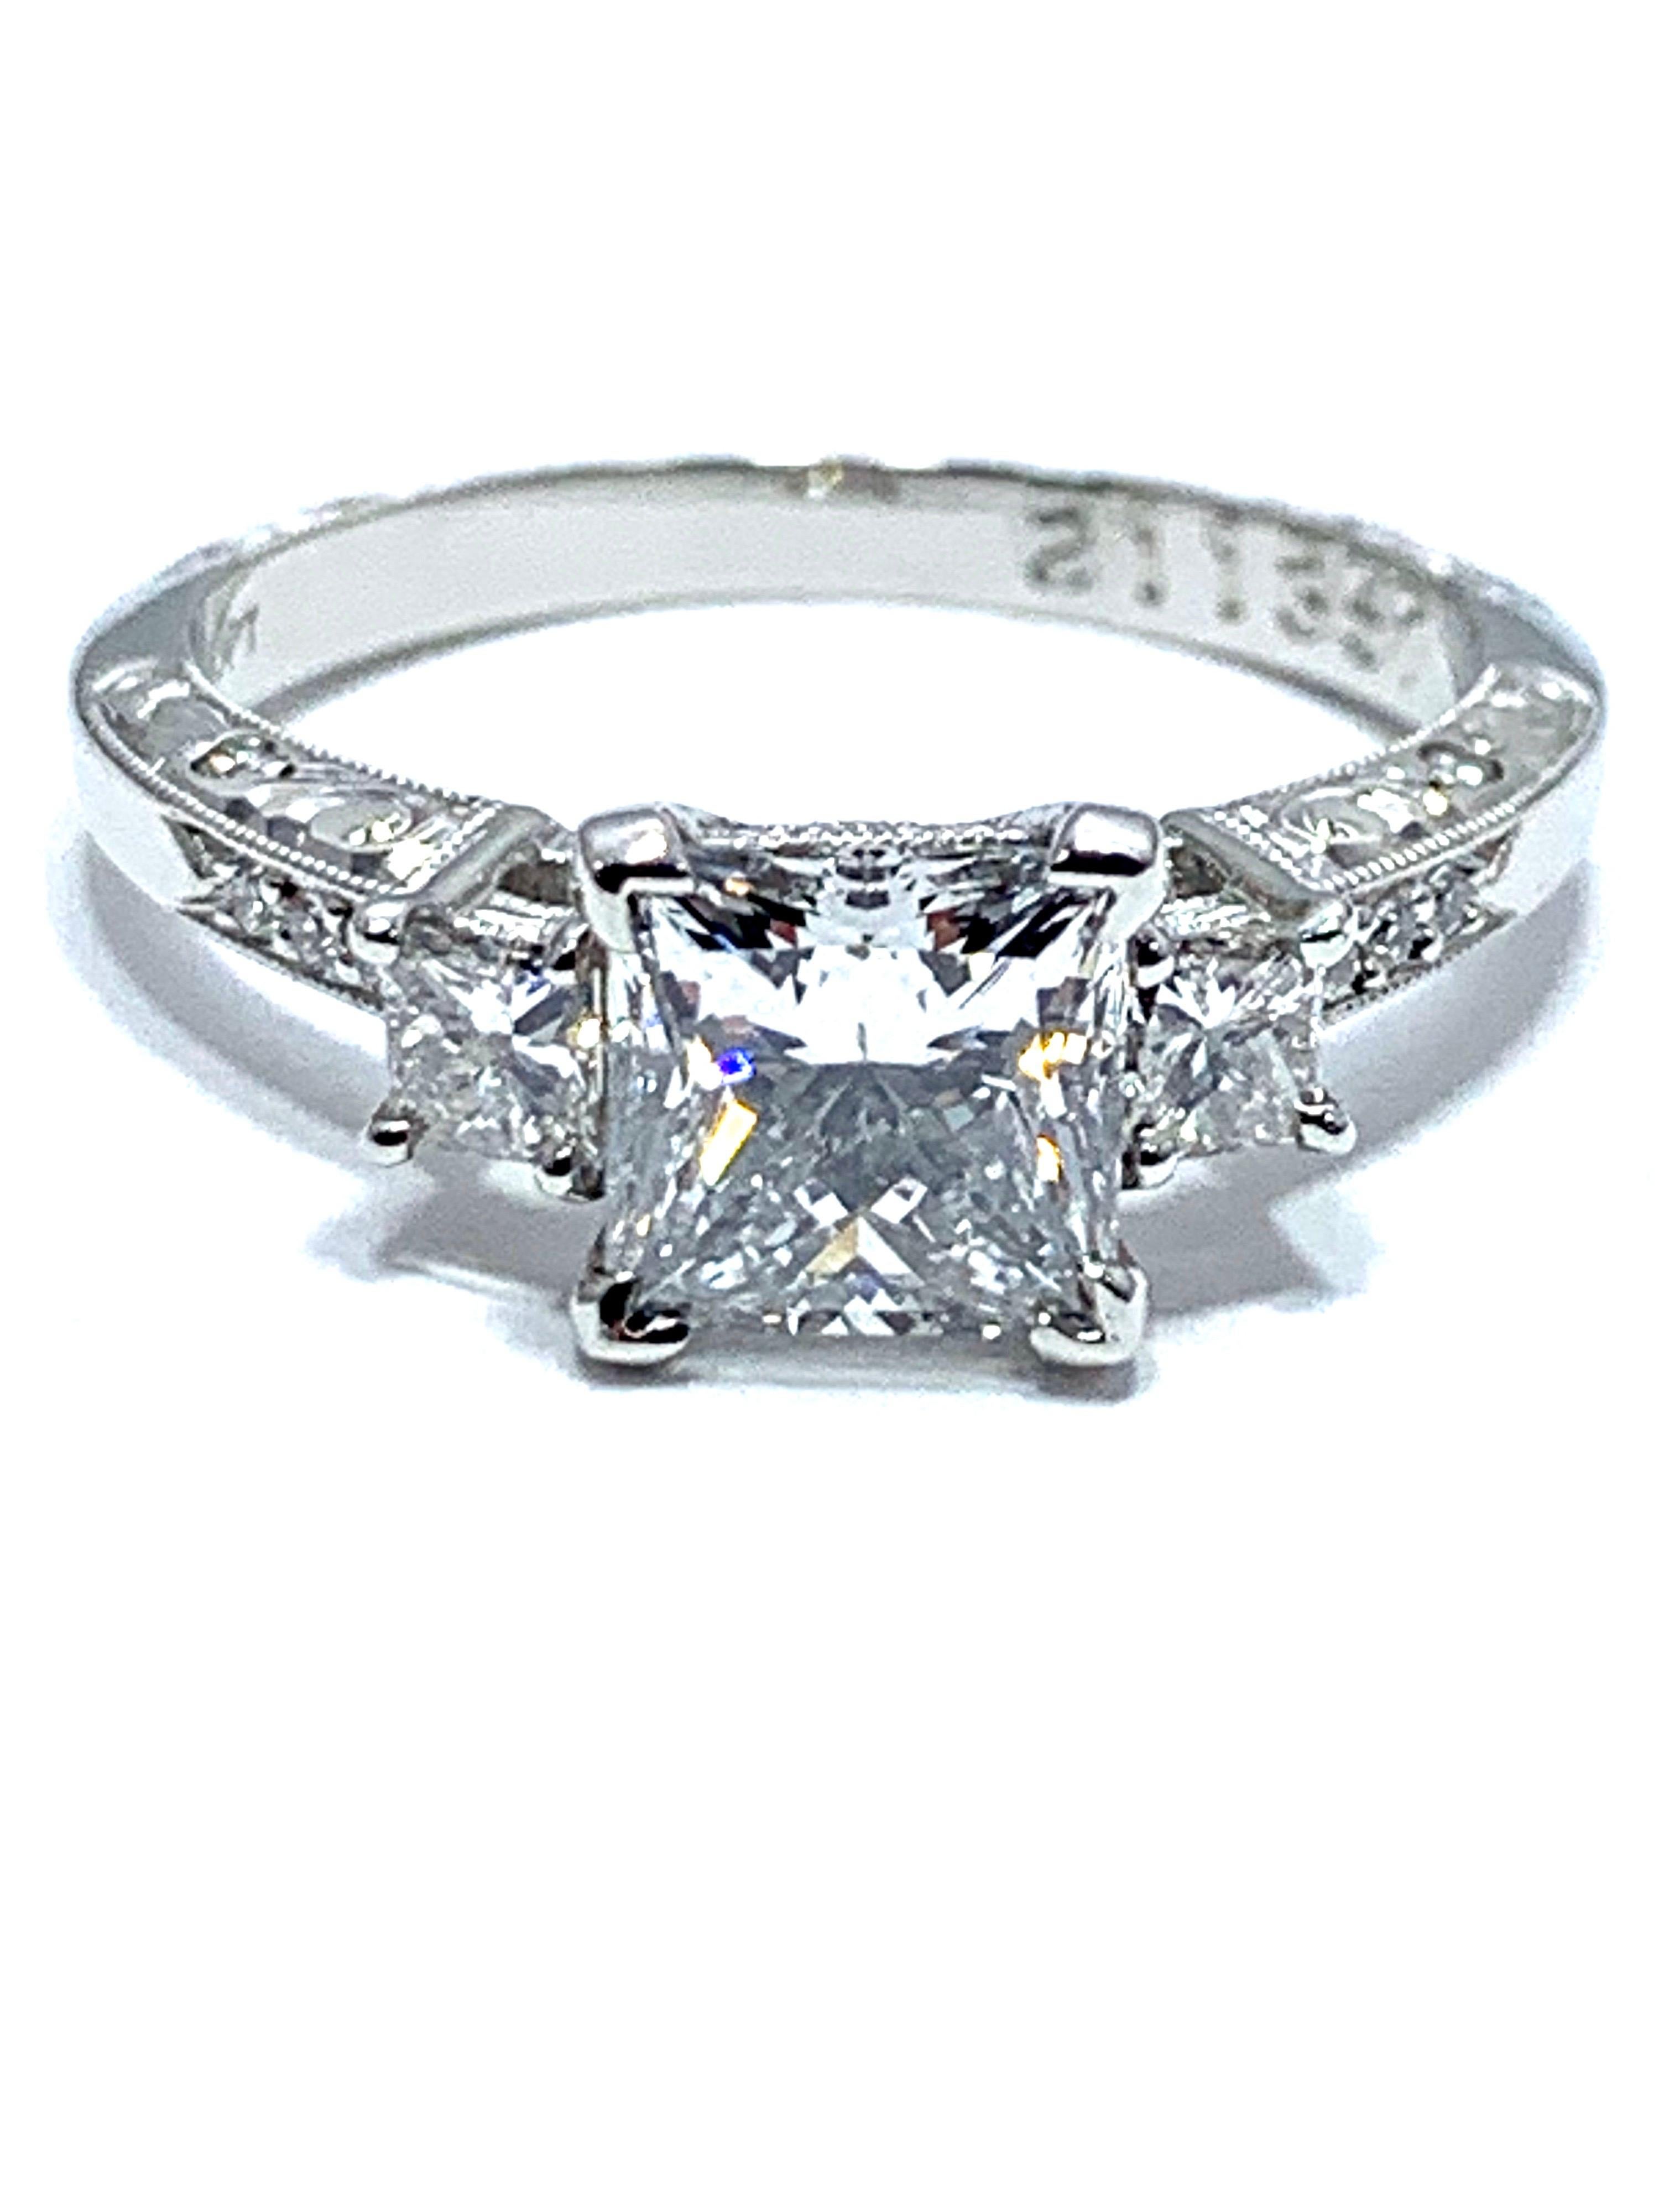 An eye catching 1.19 carat Princesscut brilliant diamond engagement ring.  The center diamond is set in a four prong platinum head with a single princess cut on either side and three round diamonds extending down the hand engraved  platinum shank.  